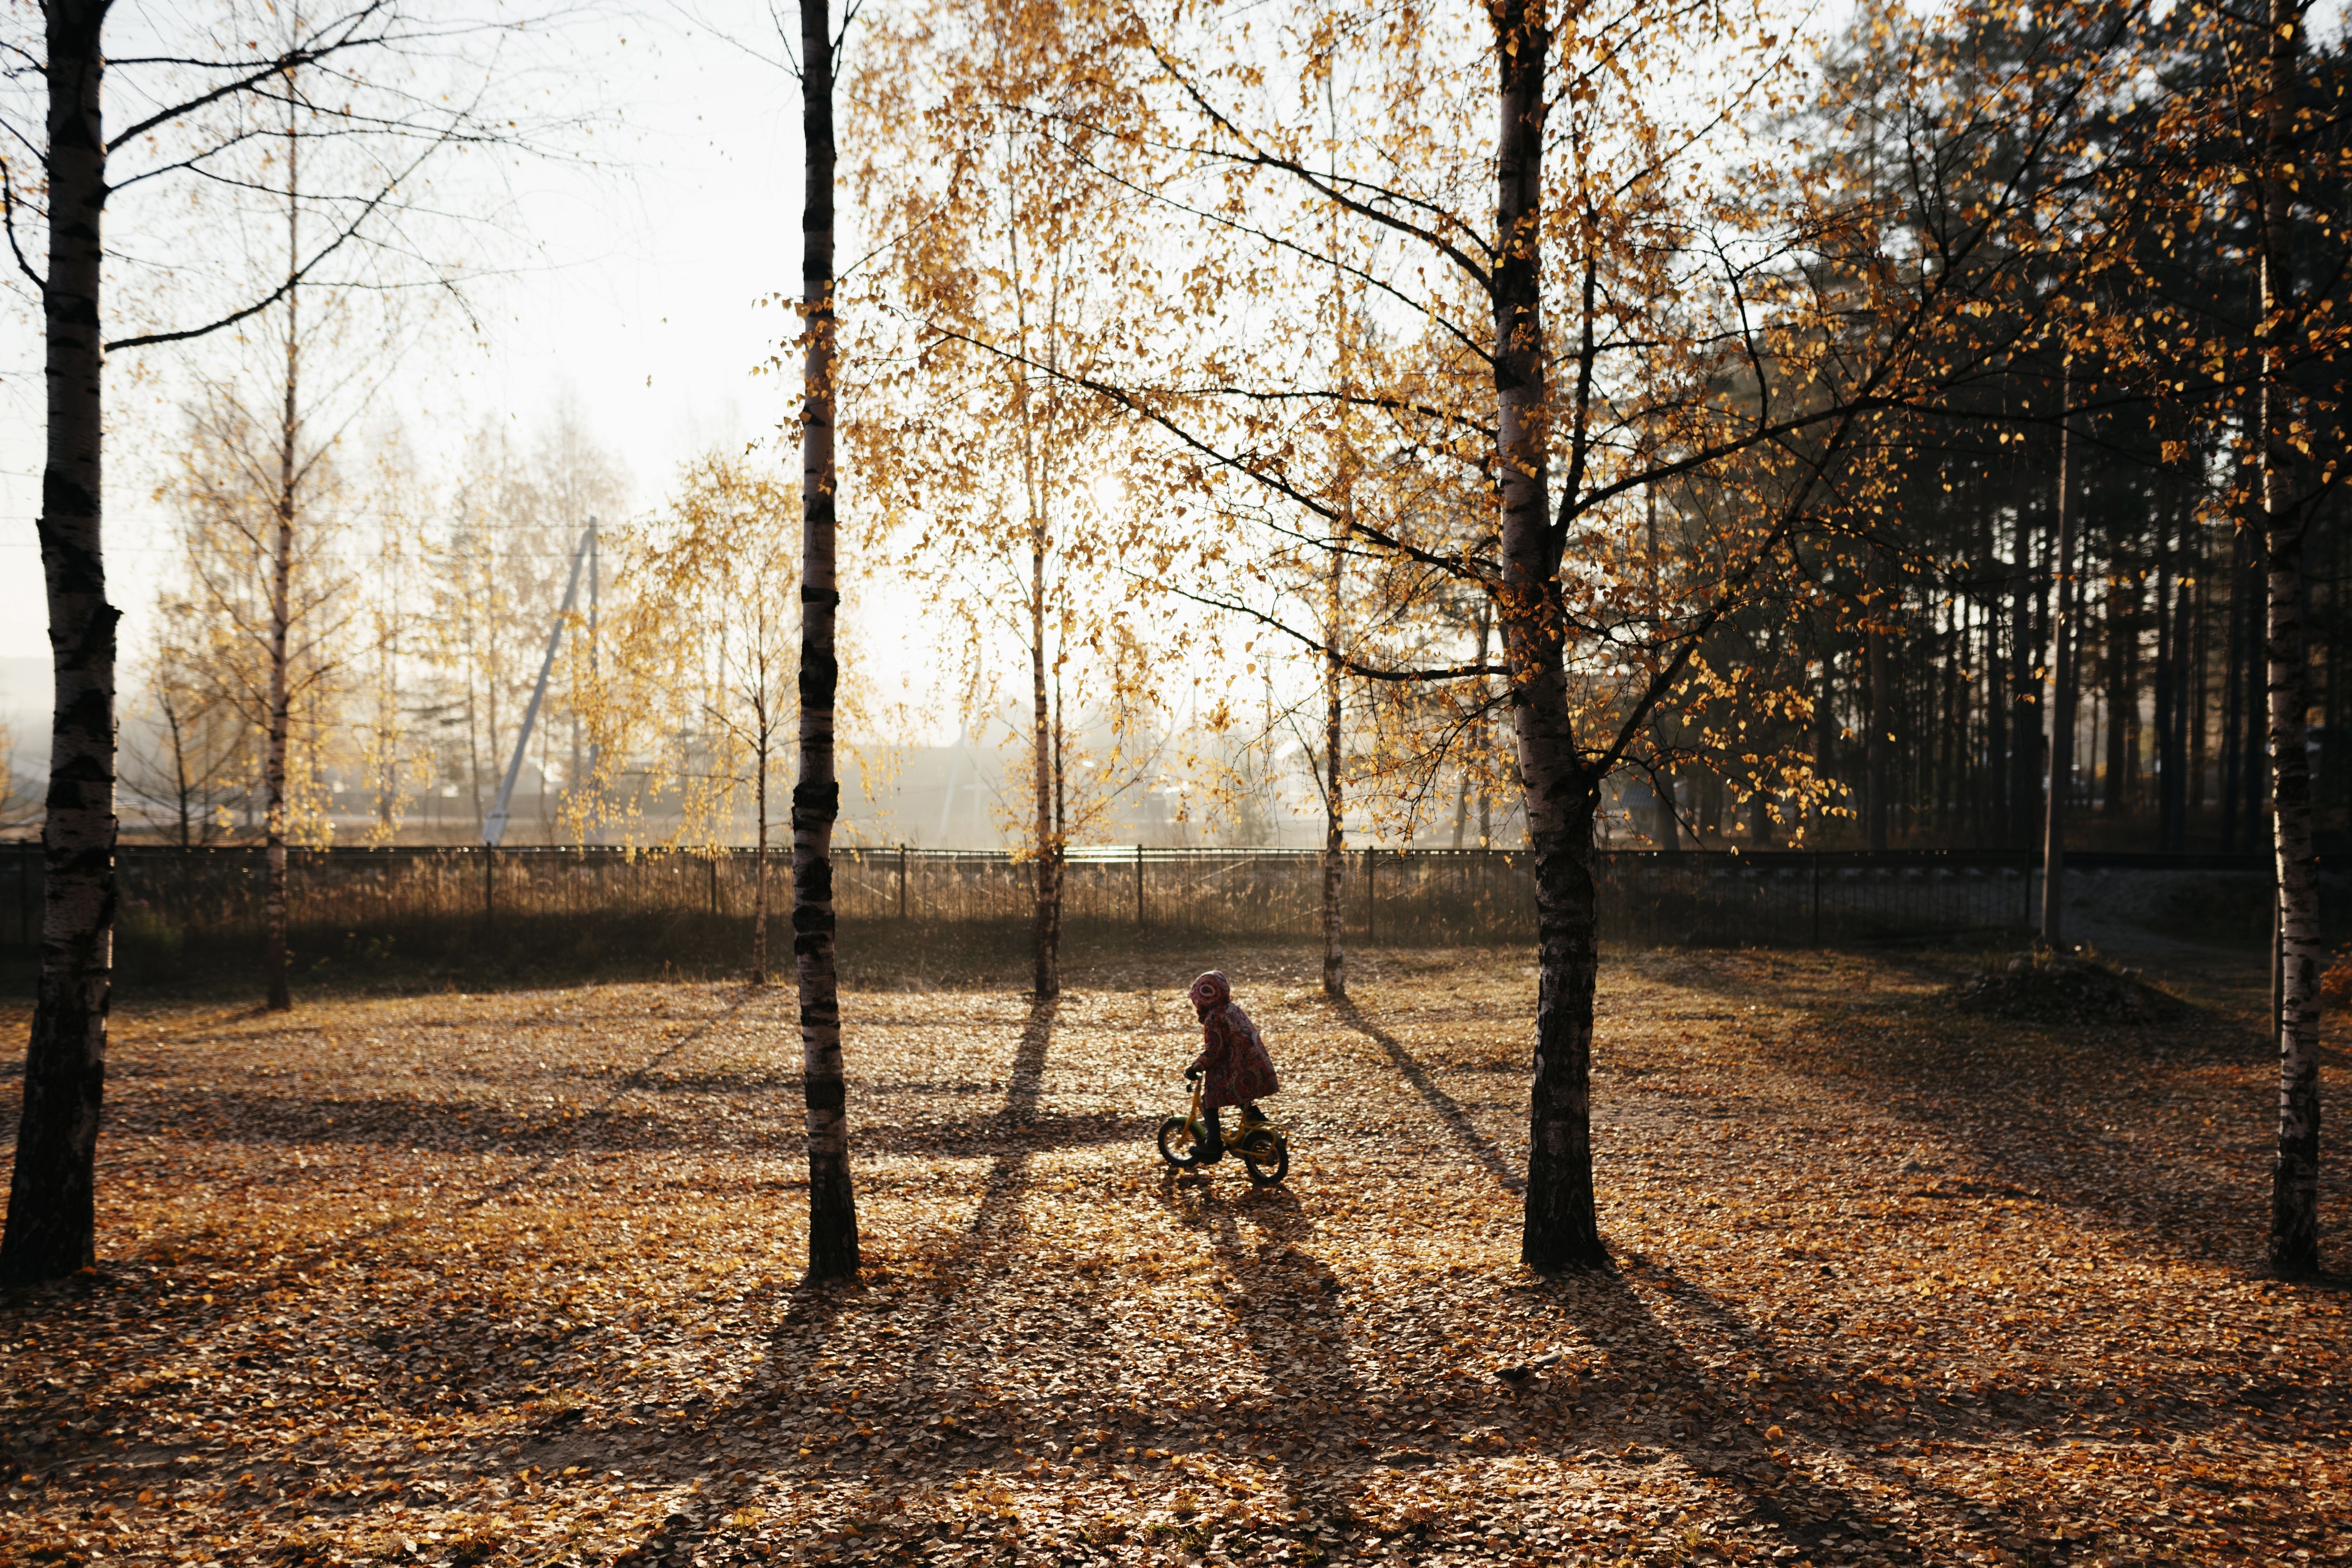 Image of a young child riding a bike through the woods.